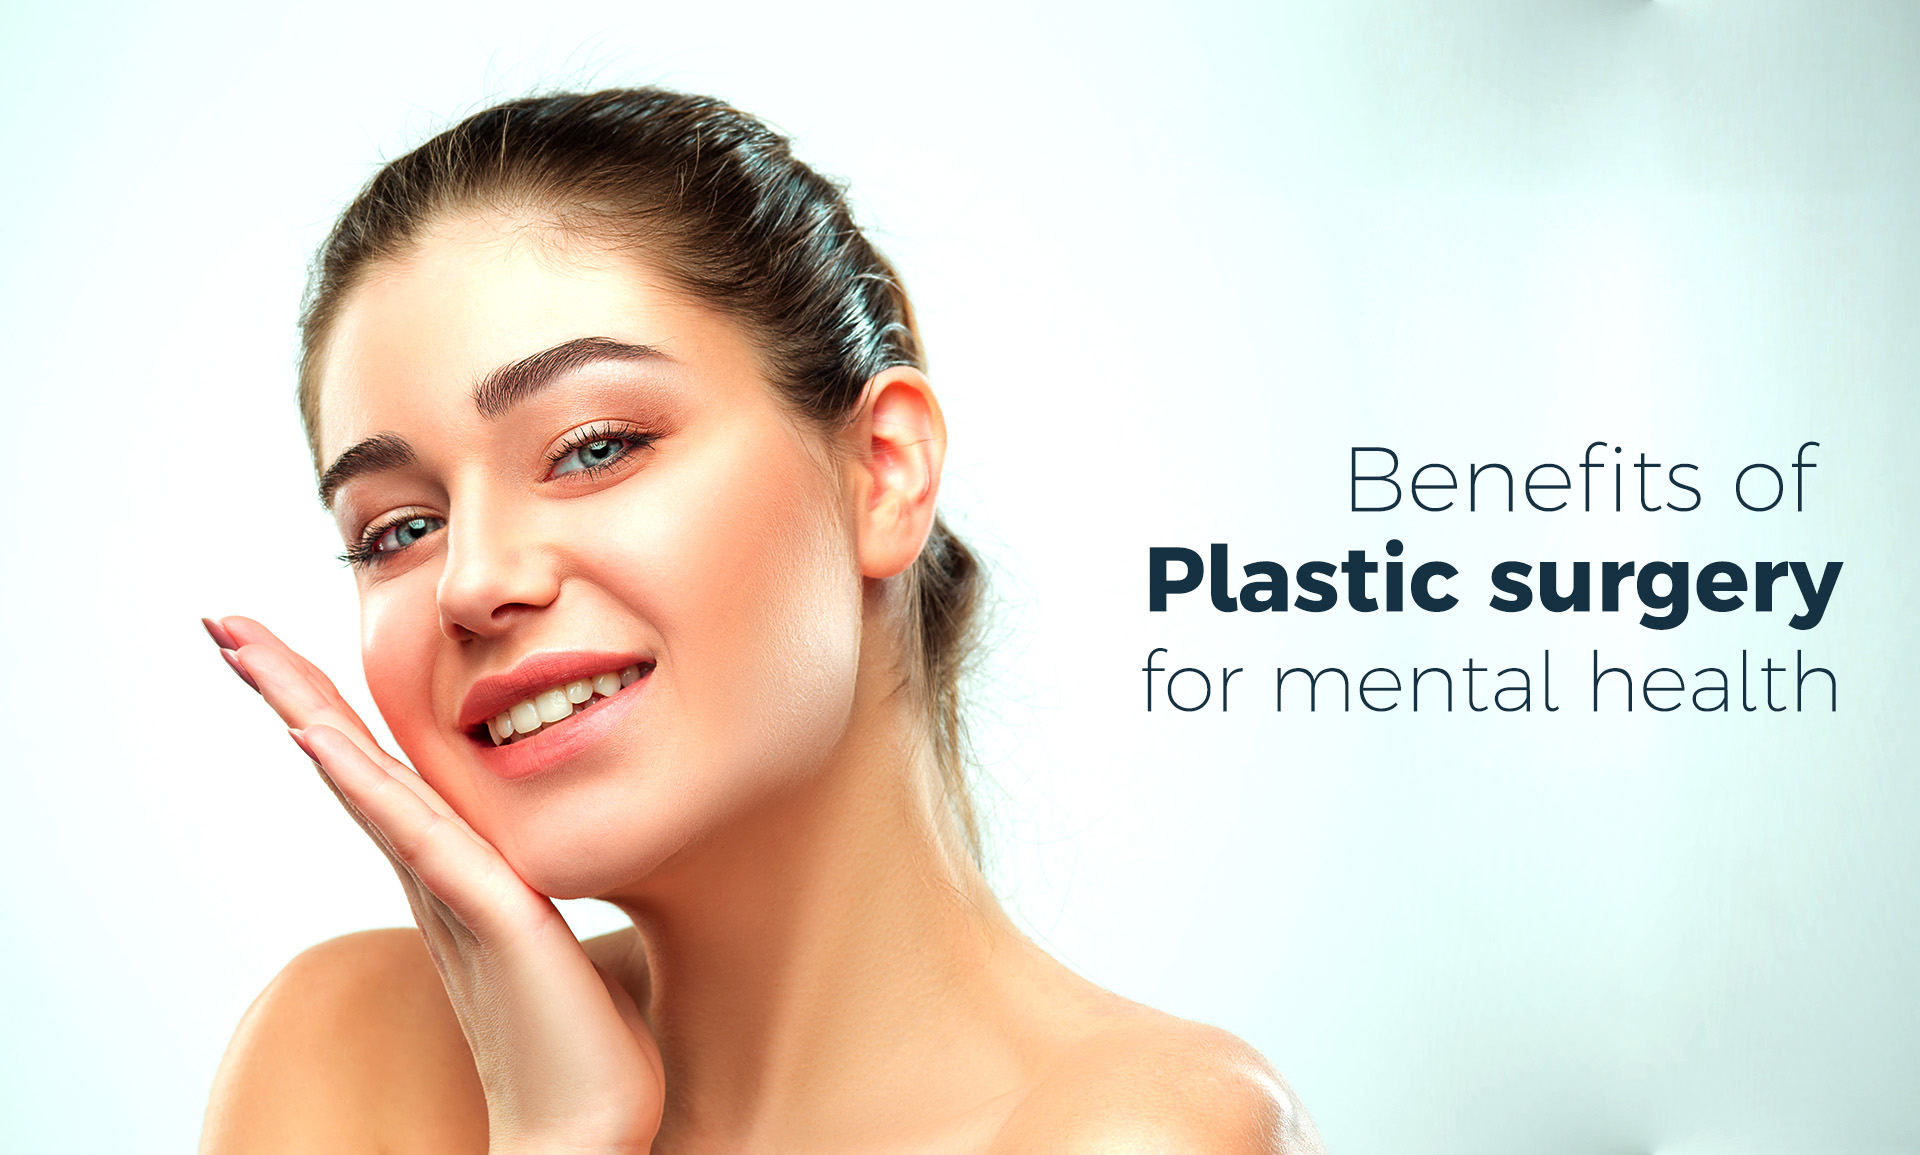 The Benefits of Plastic Surgery for Your Mental Health